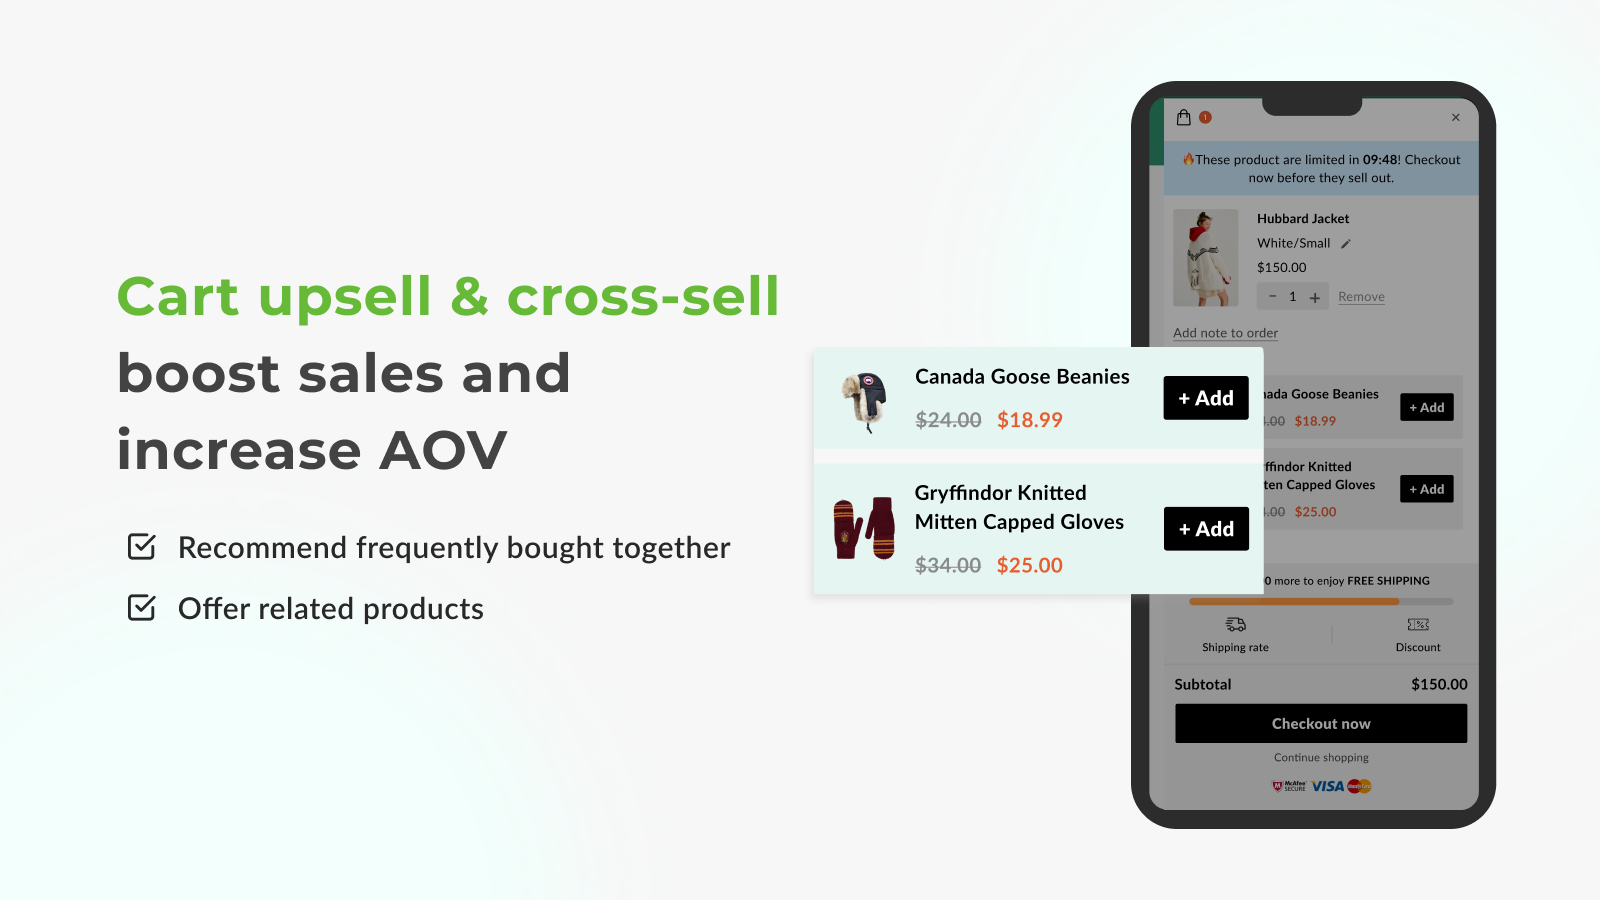 Cart upsell & cross-sell boost sales and increase AOV